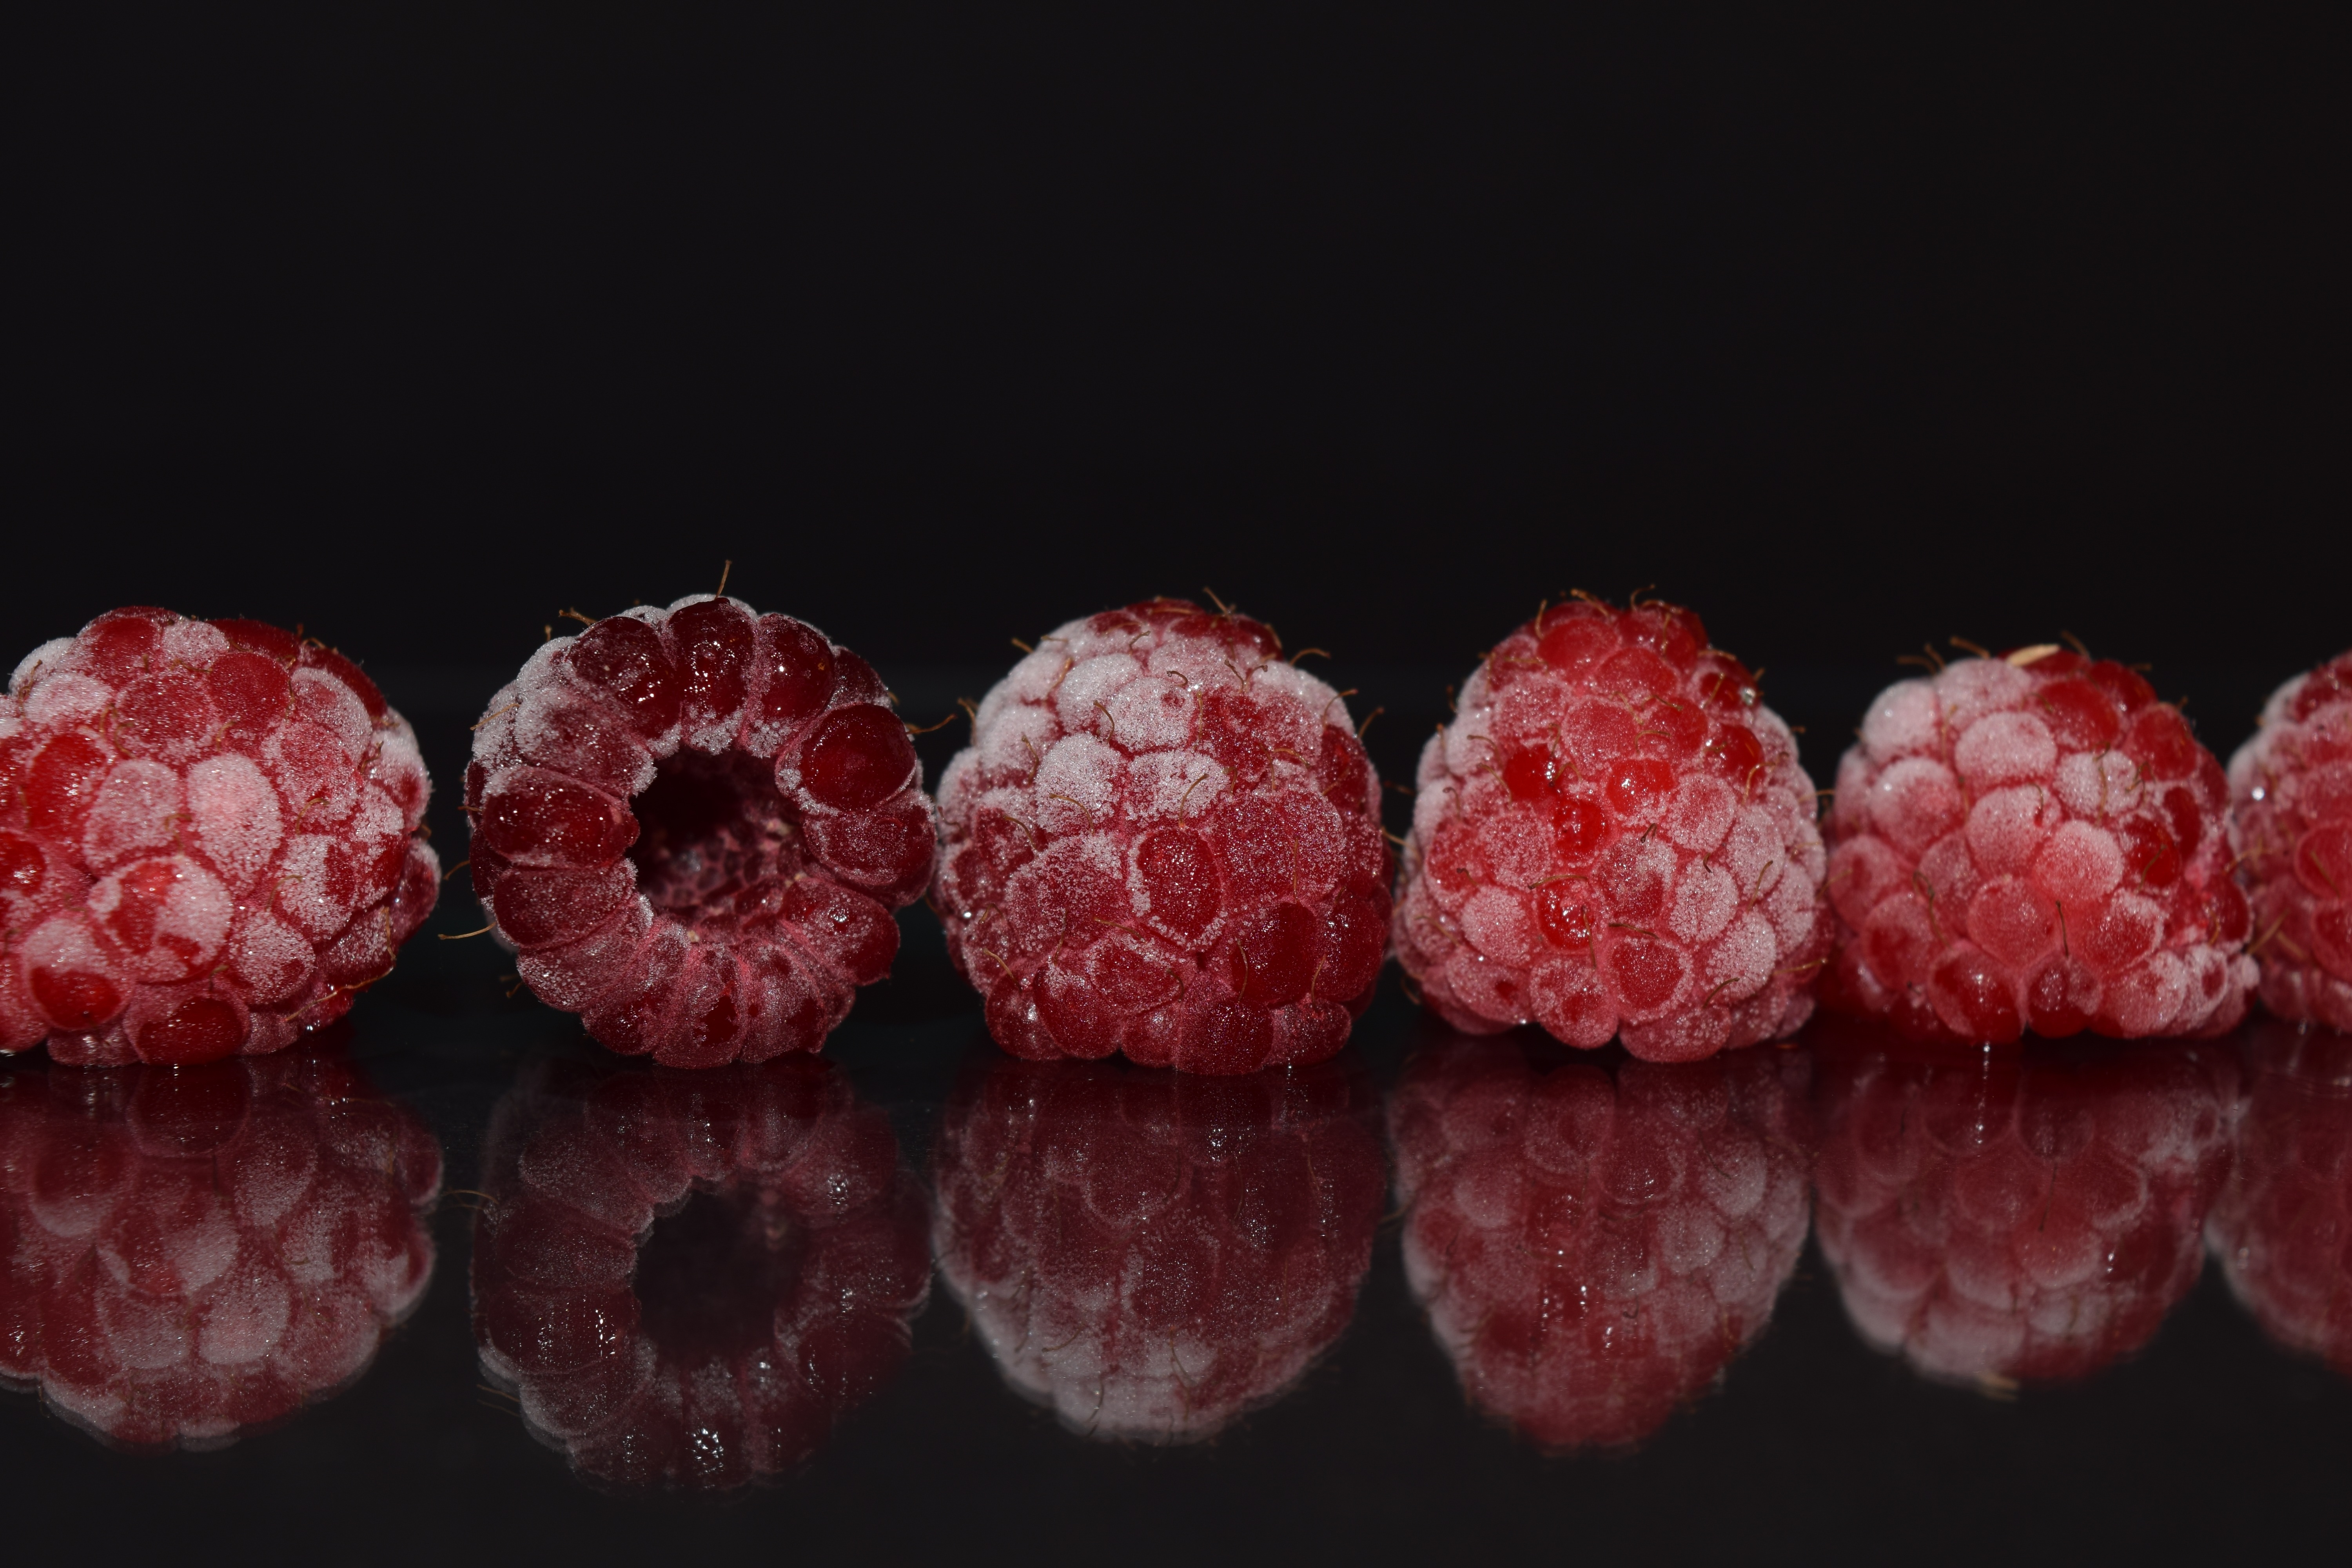 131848 download wallpaper food, raspberry, berries, reflection, frozen screensavers and pictures for free